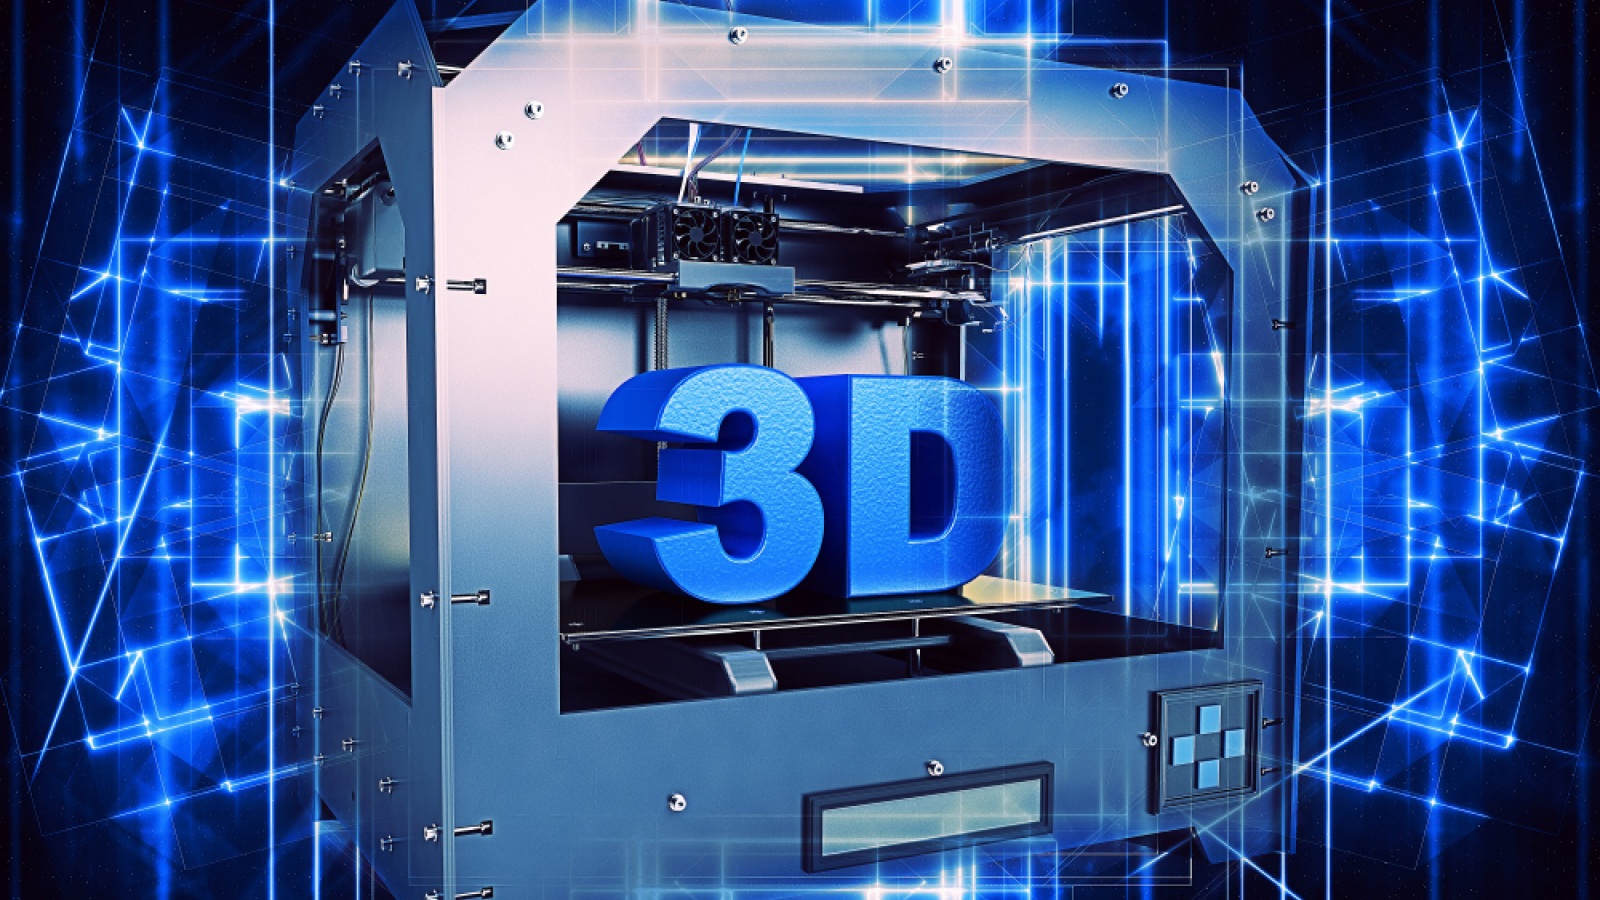 3D Systems' SLA 3D Printers Enable Align Technology's Unprecedented Use of  3D Printing in Manufacturing